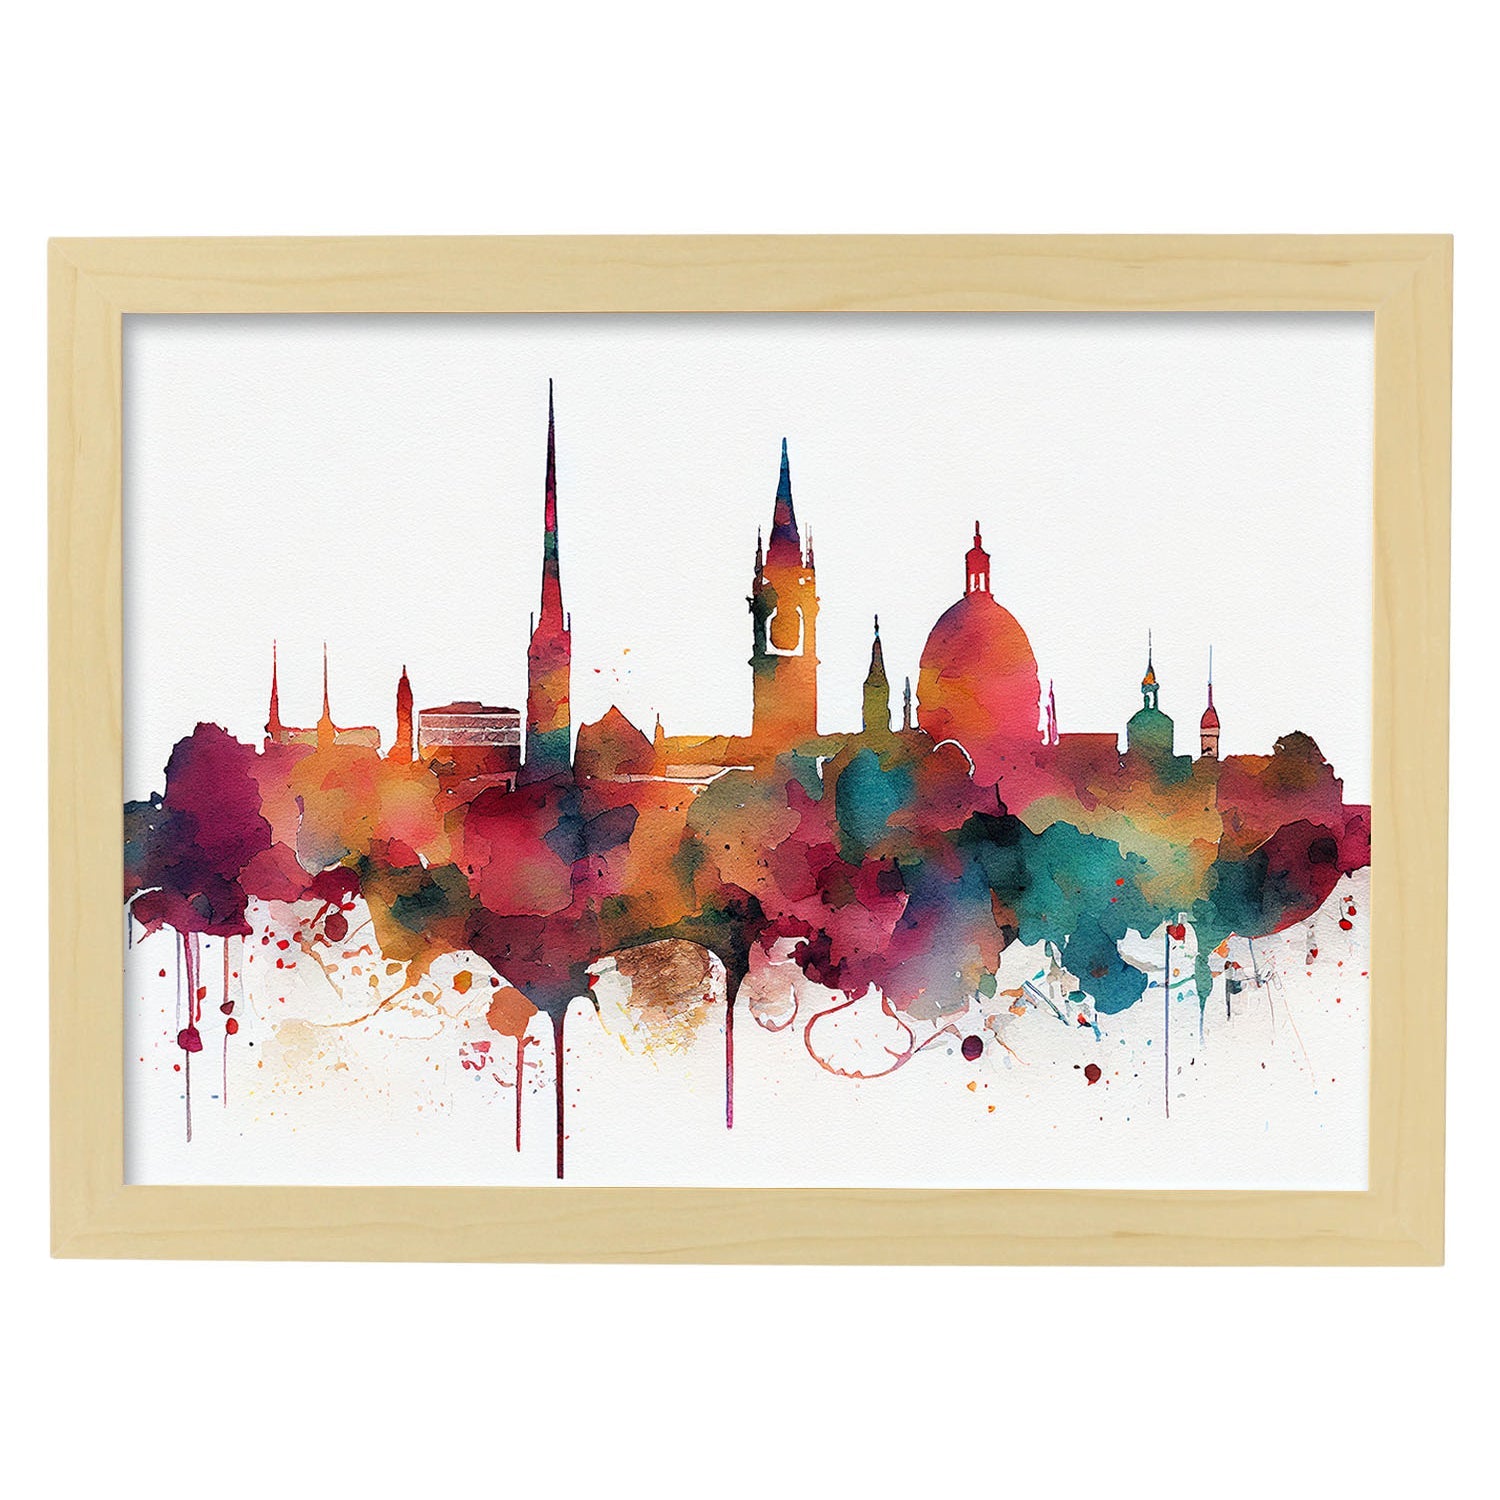 Nacnic watercolor of a skyline of the city of Stuttgart. Aesthetic Wall Art Prints for Bedroom or Living Room Design.-Artwork-Nacnic-A4-Marco Madera Clara-Nacnic Estudio SL